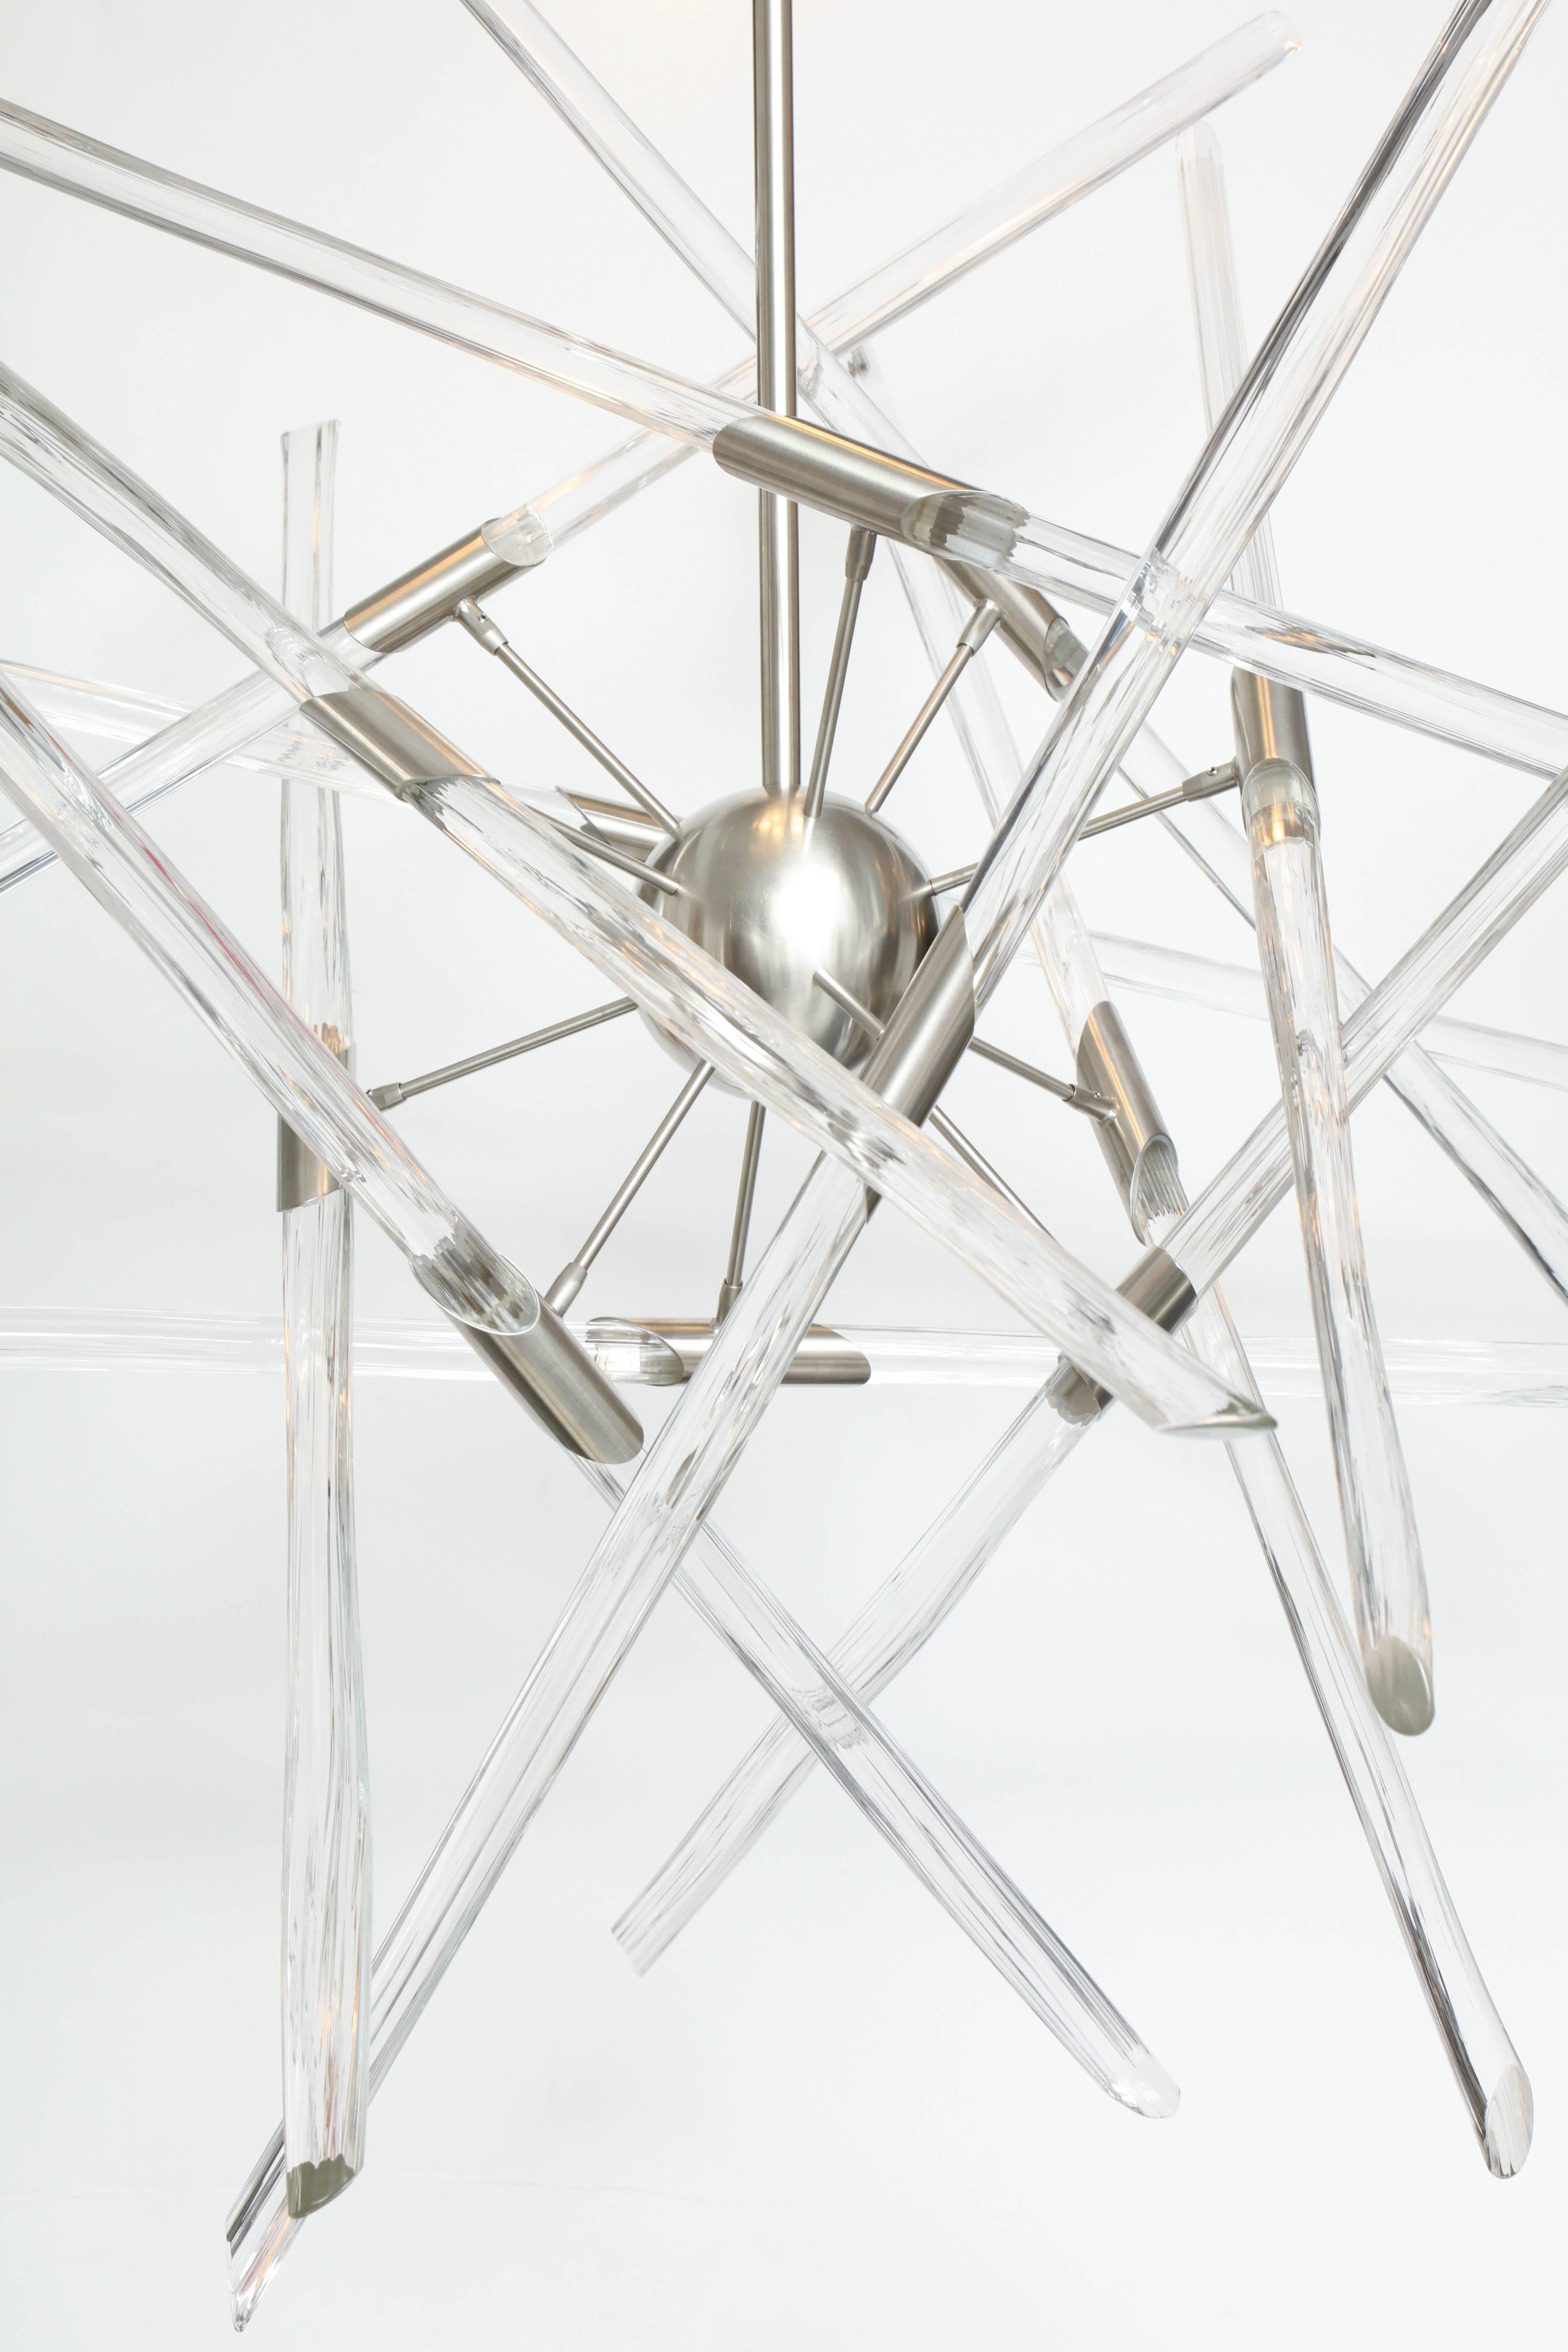 Contemporary American artist Barry Entner's Tangent Chandelier is comprised of clear textured solid glass sticks and a nickel plated steel frame. The canopy holds 5 LED round lights that shine down on the adjustable sticks as they orbit a 5